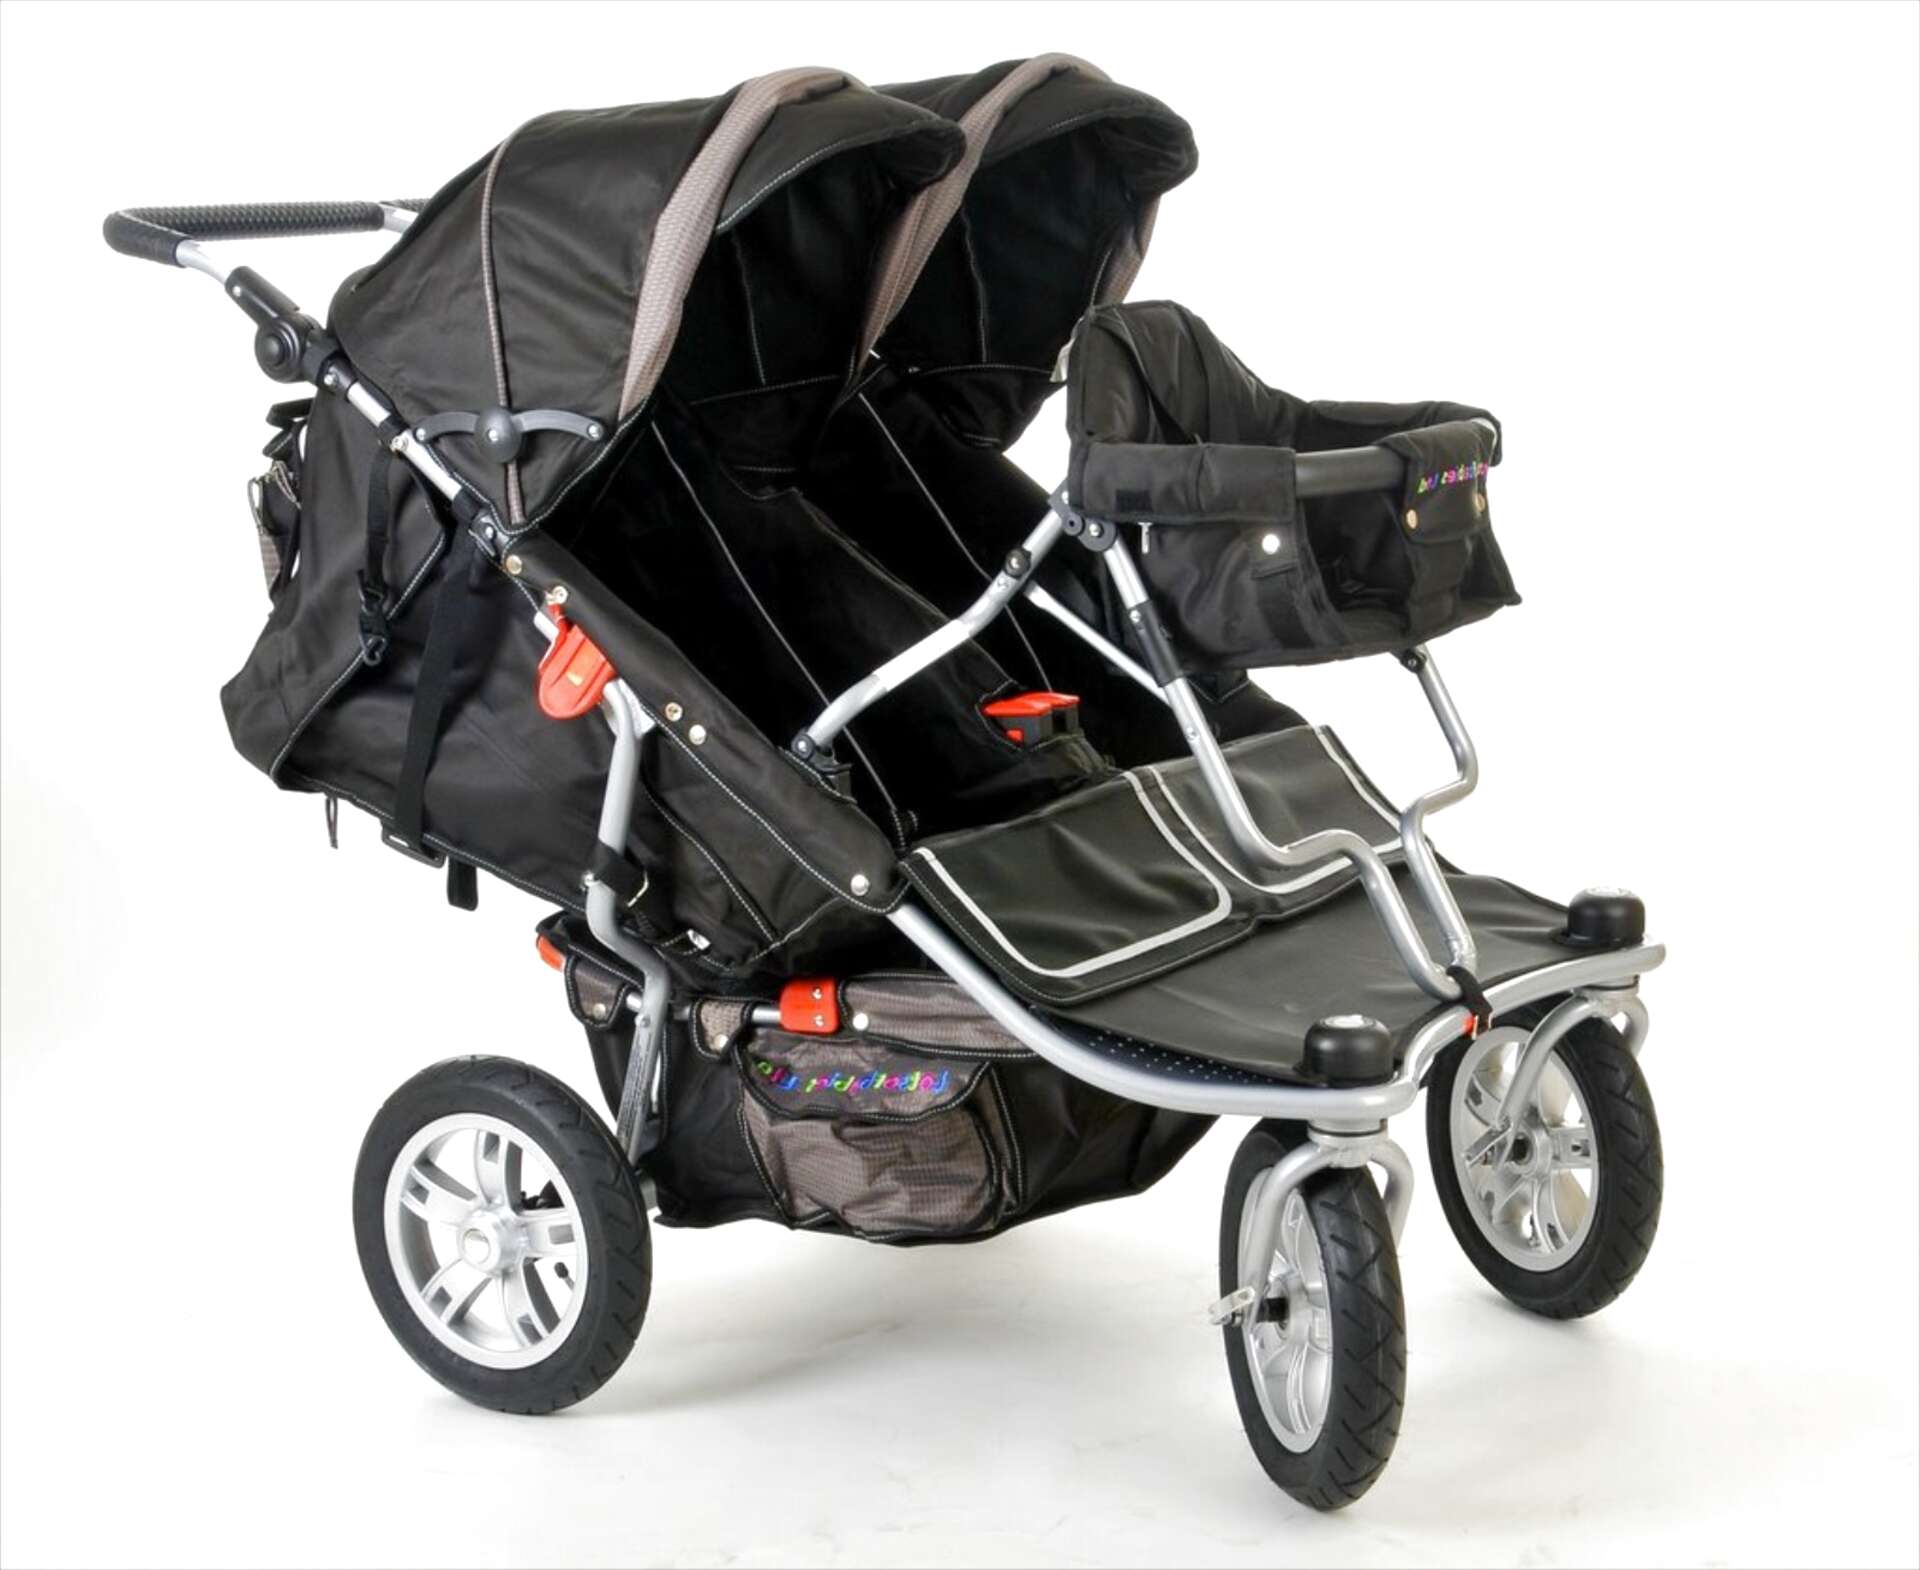 triple pushchairs for sale uk